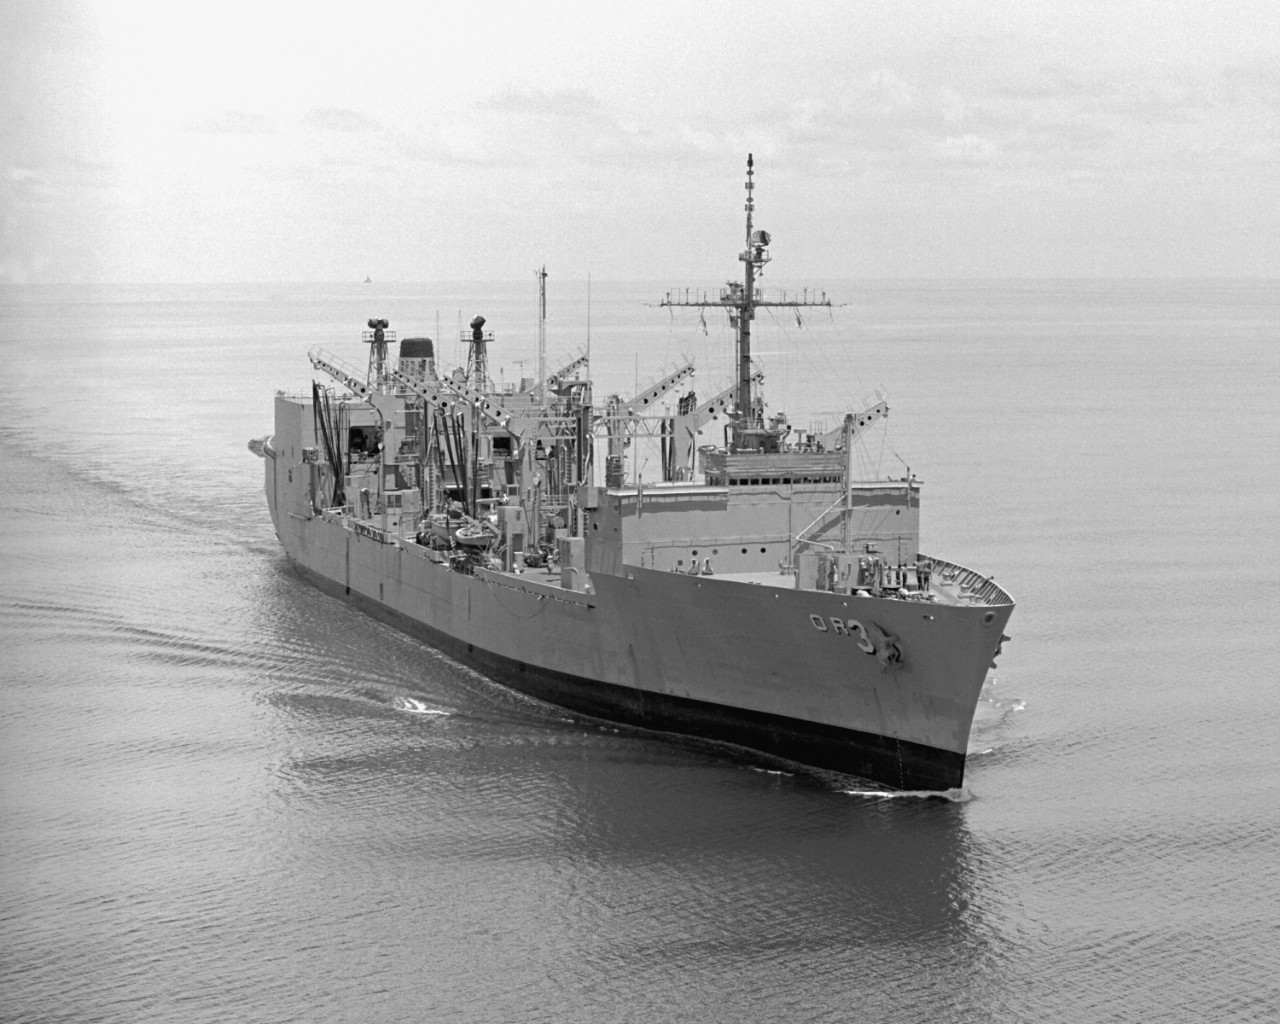 Kansas City underway in the Pacific, January 1993. (U.S. Navy Photograph DN-SN-93-01365, National Archives and Records Administration, Still Pictures Division, College Park, Md.)